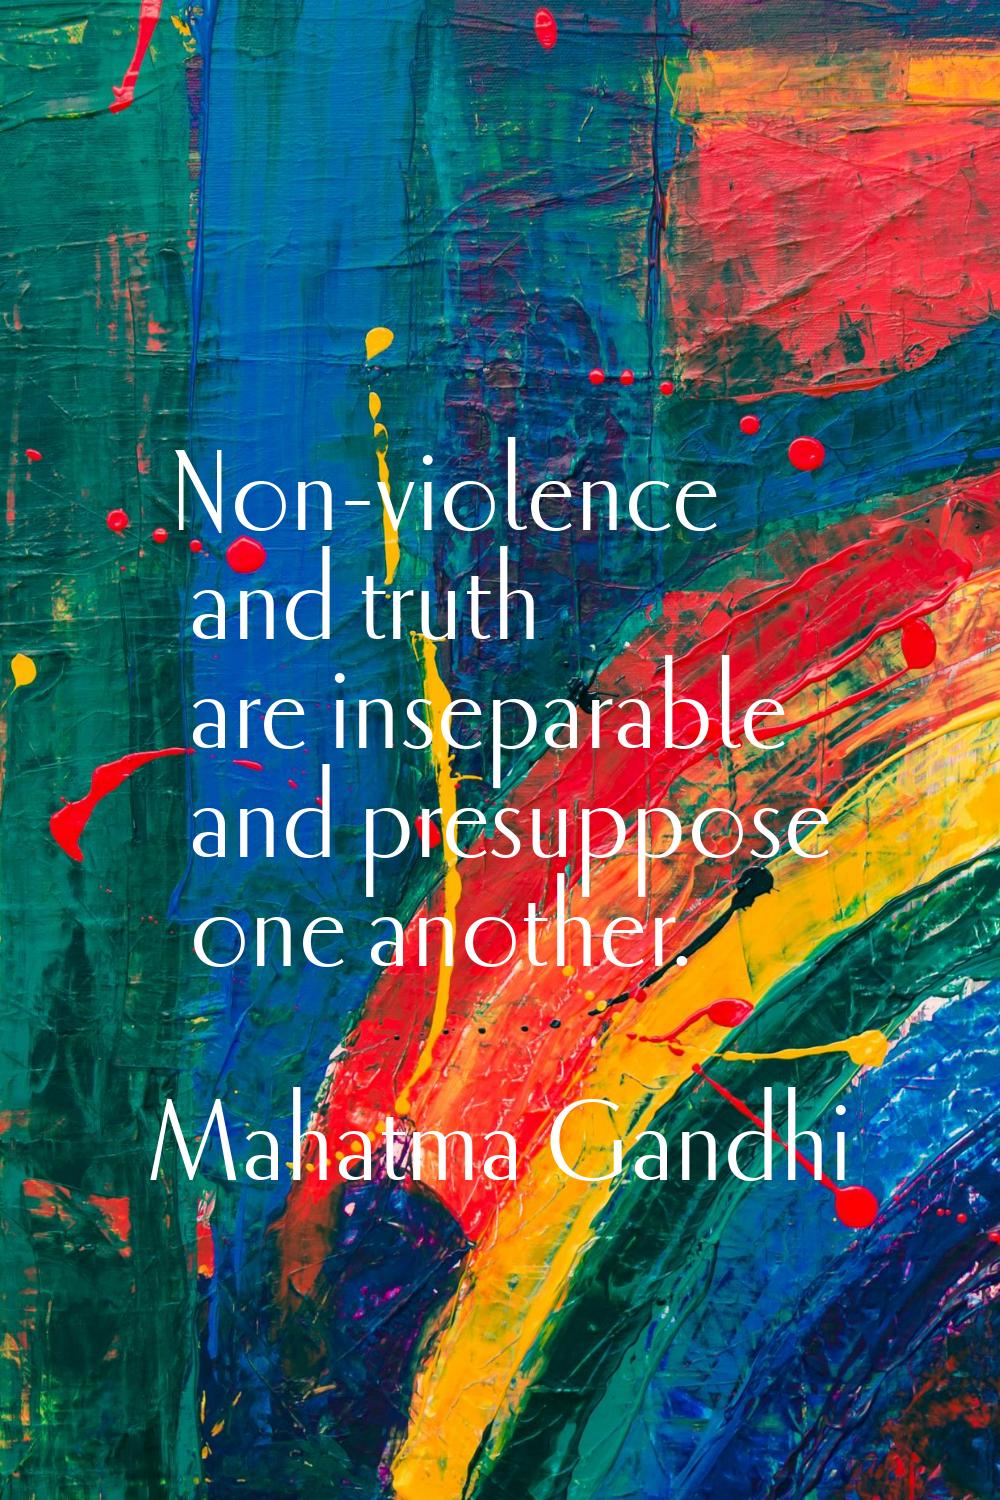 Non-violence and truth are inseparable and presuppose one another.